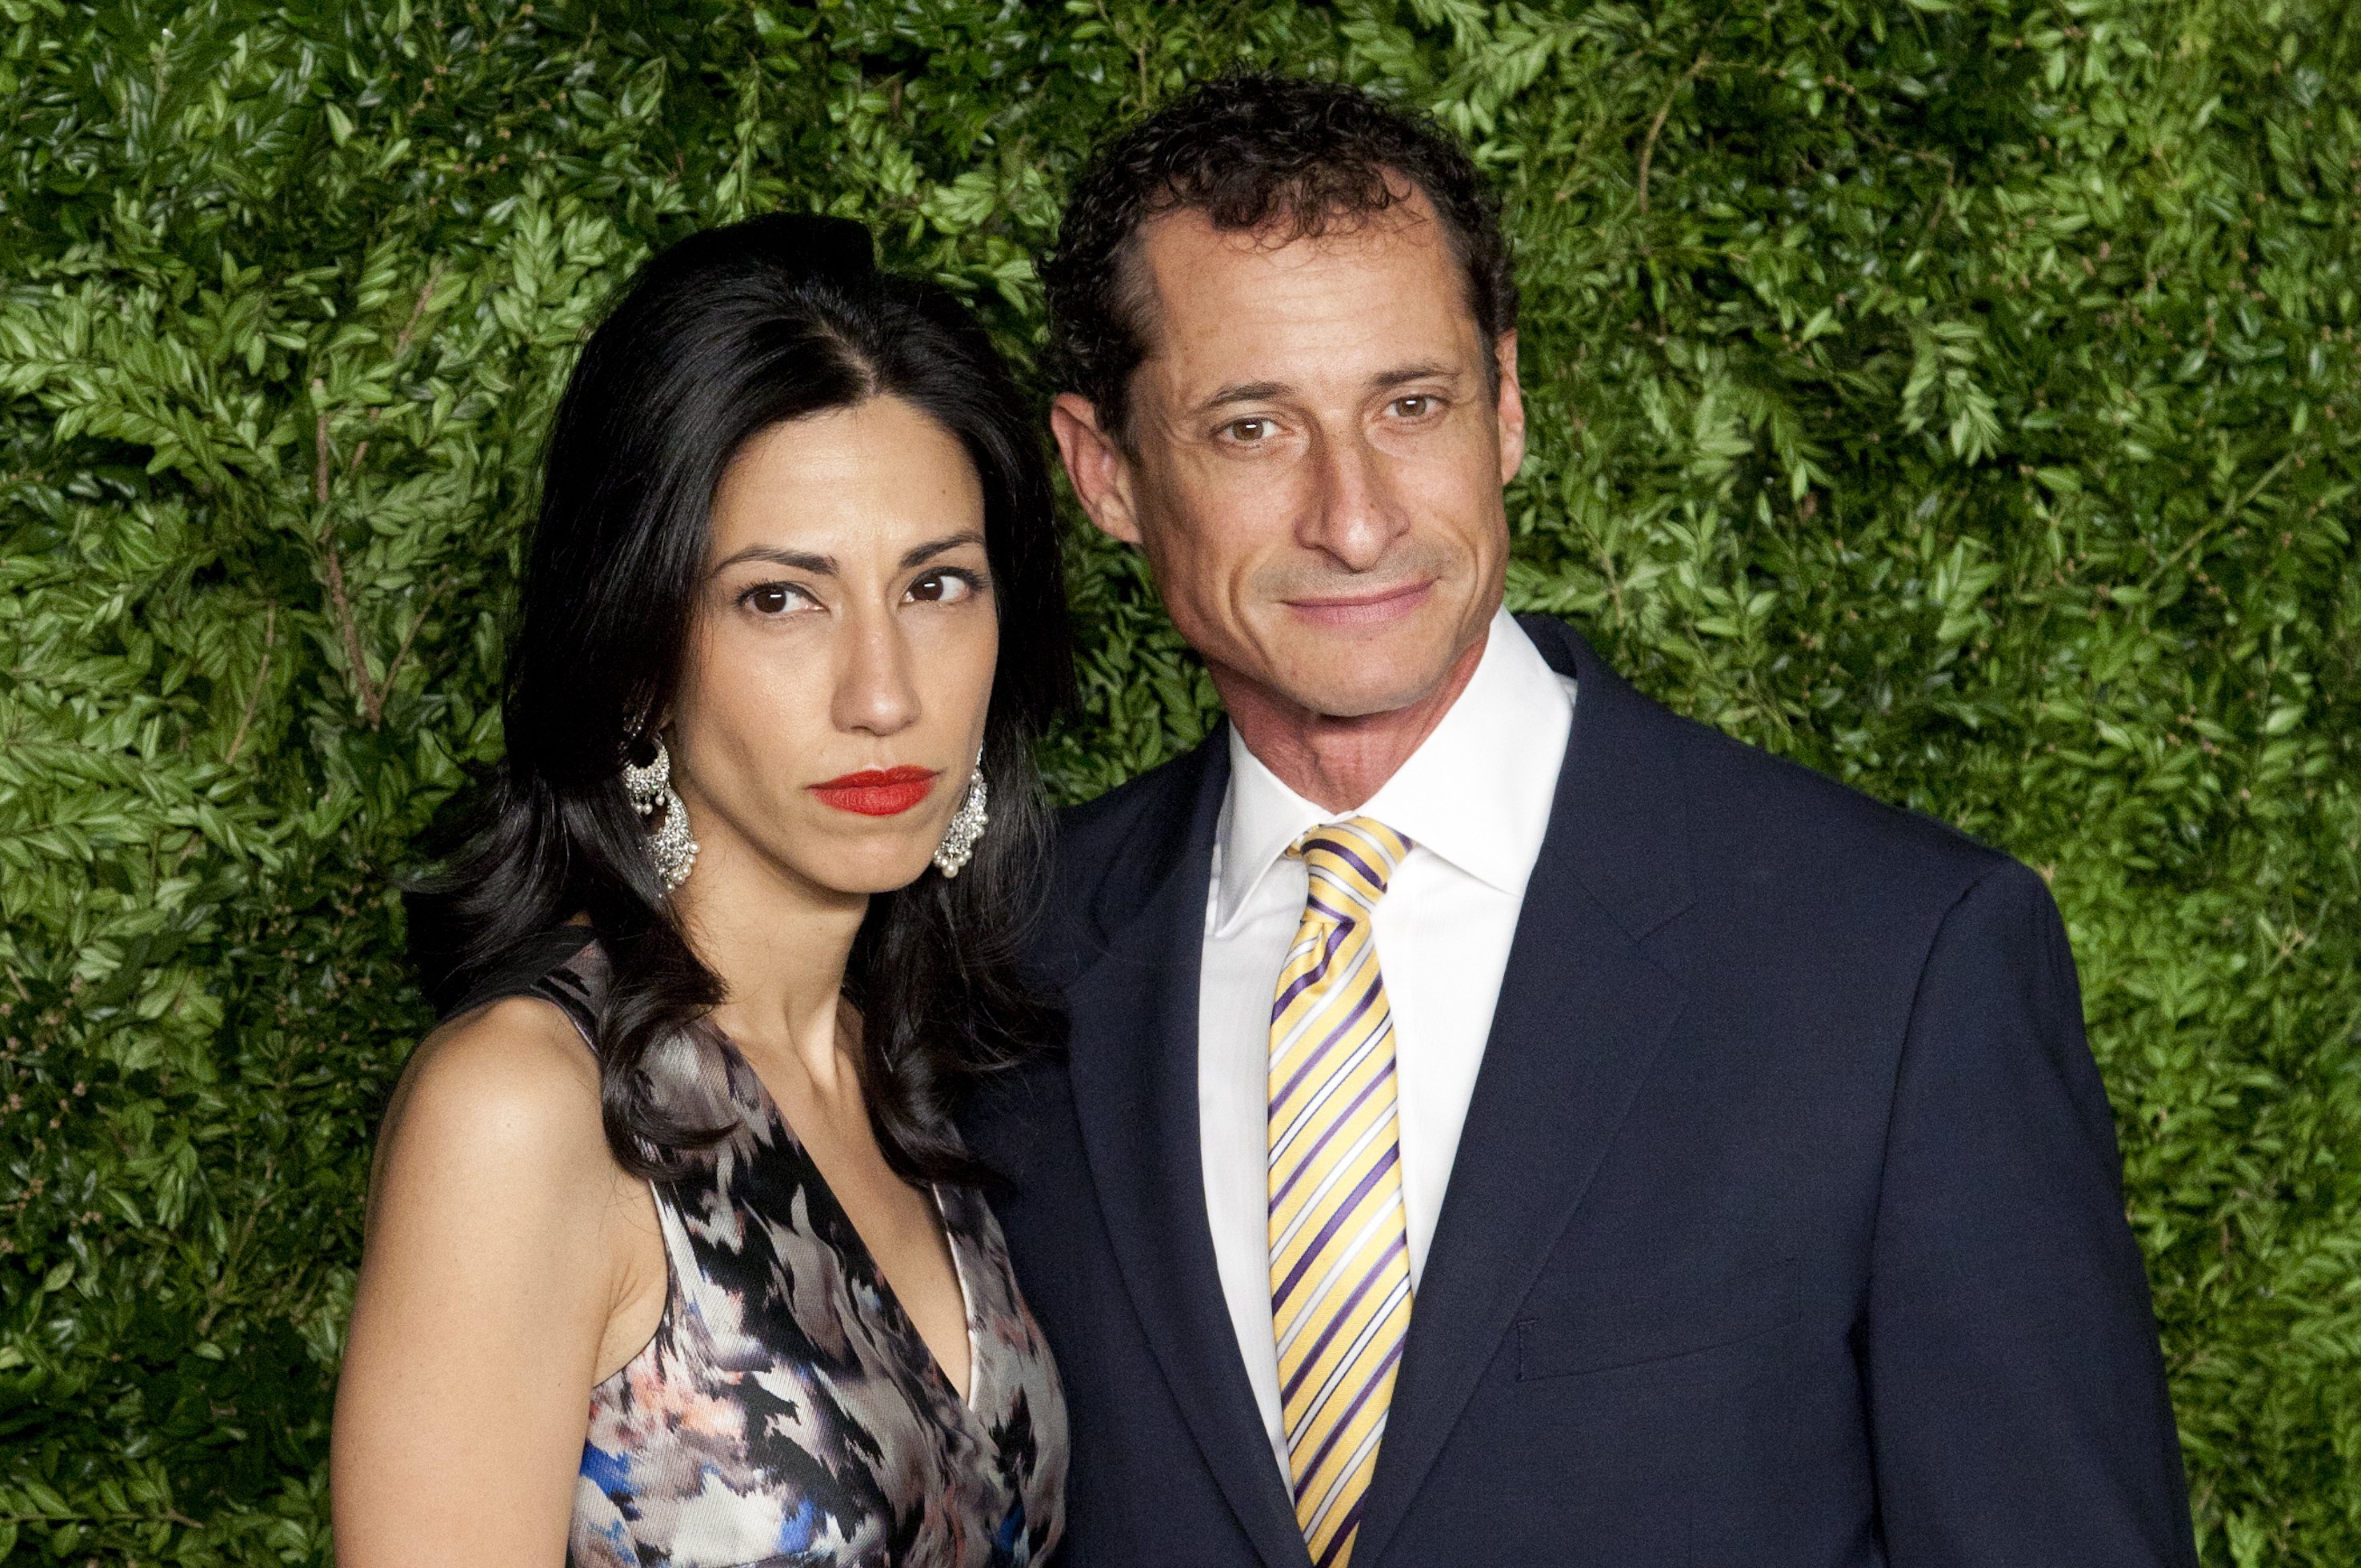 Huma Abedin and Anthony Weiner attend "The Twelfth Annual CFDA/Vogue Fashion Fund Awards" at Spring Studios in New York City | Source: Getty Images